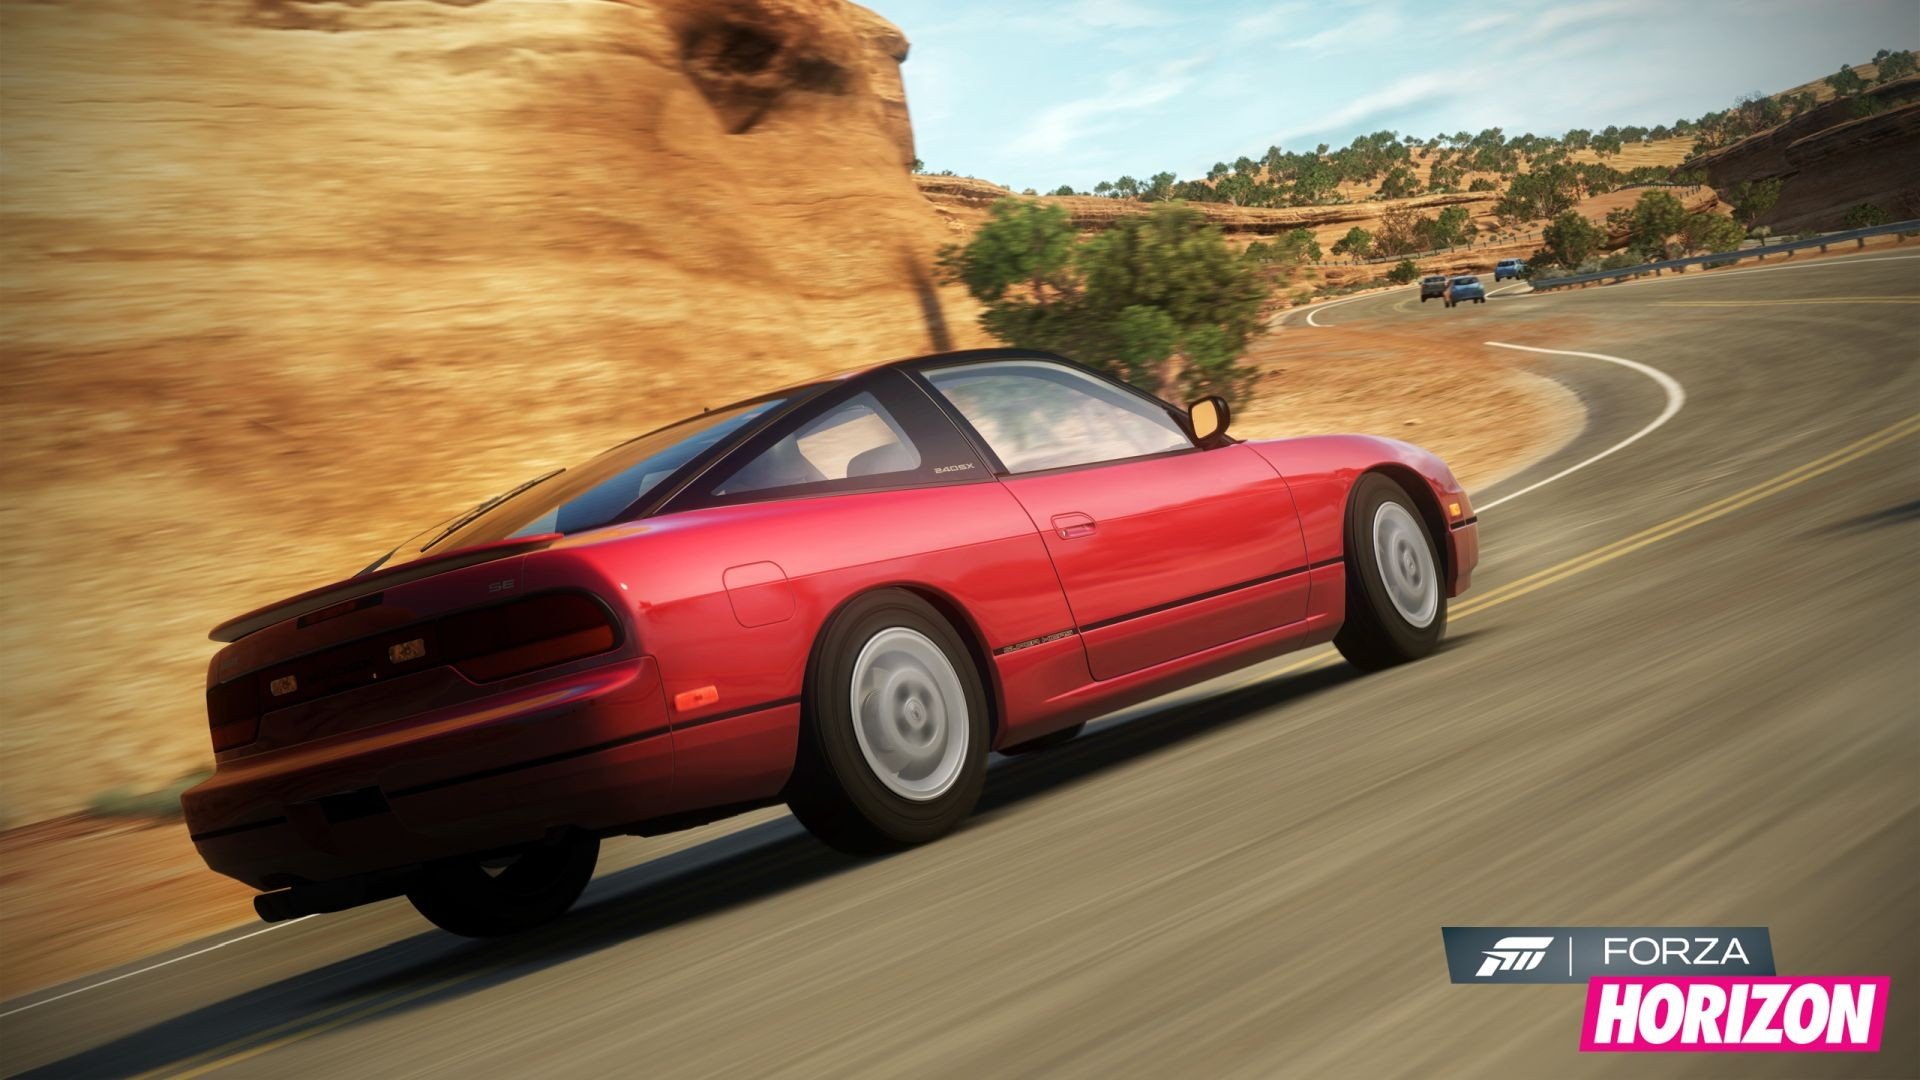 Download 1080p Forza Horizon computer wallpaper ID:47773 for free